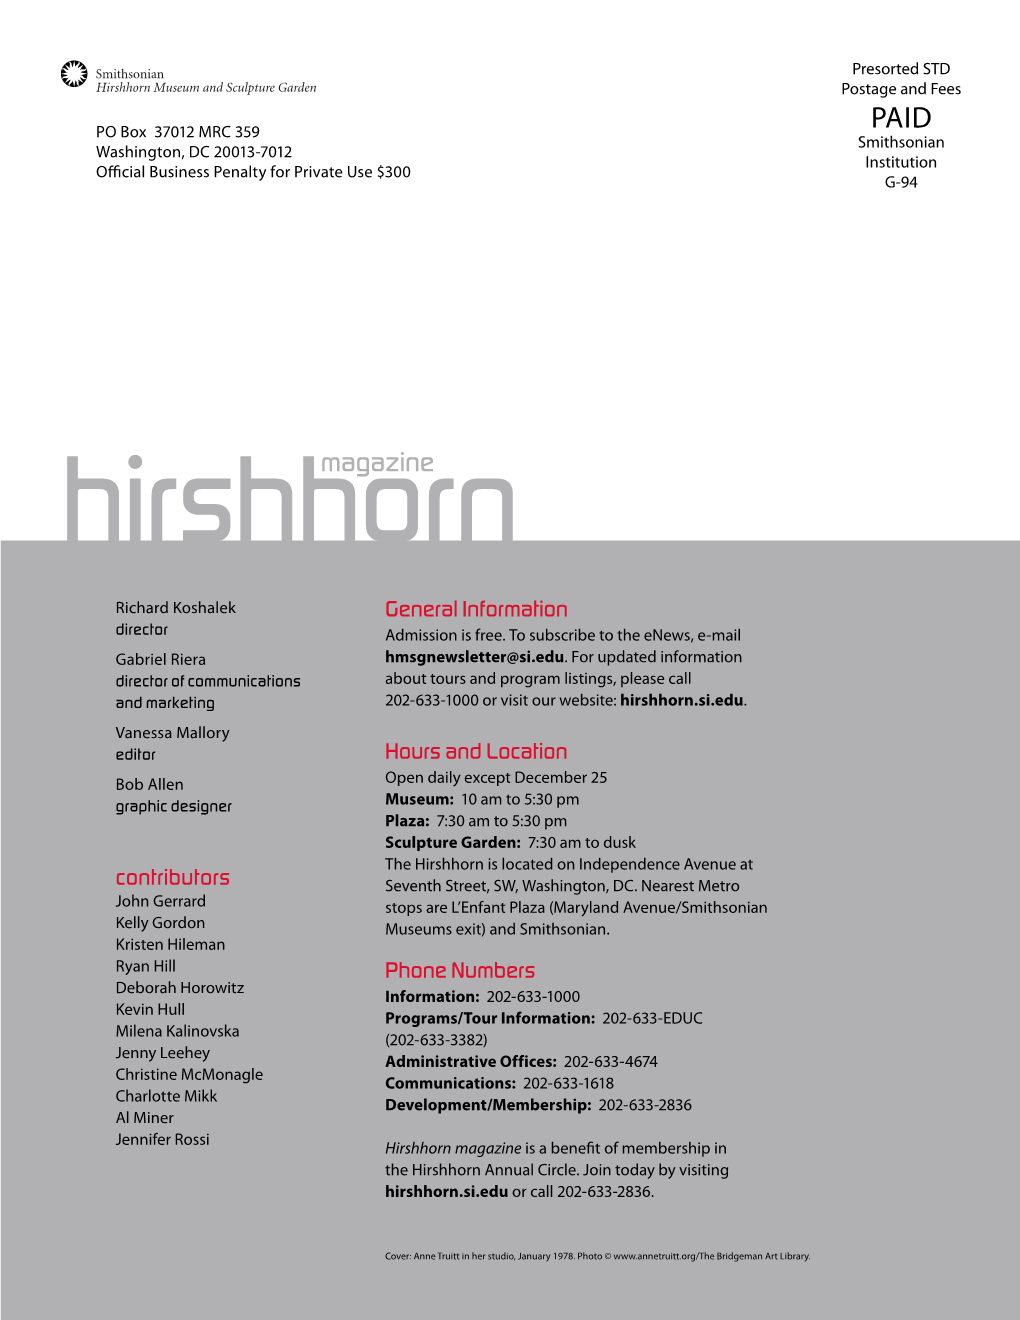 Hirshhorn Magazine Is a Benefit of Membership in the Hirshhorn Annual Circle